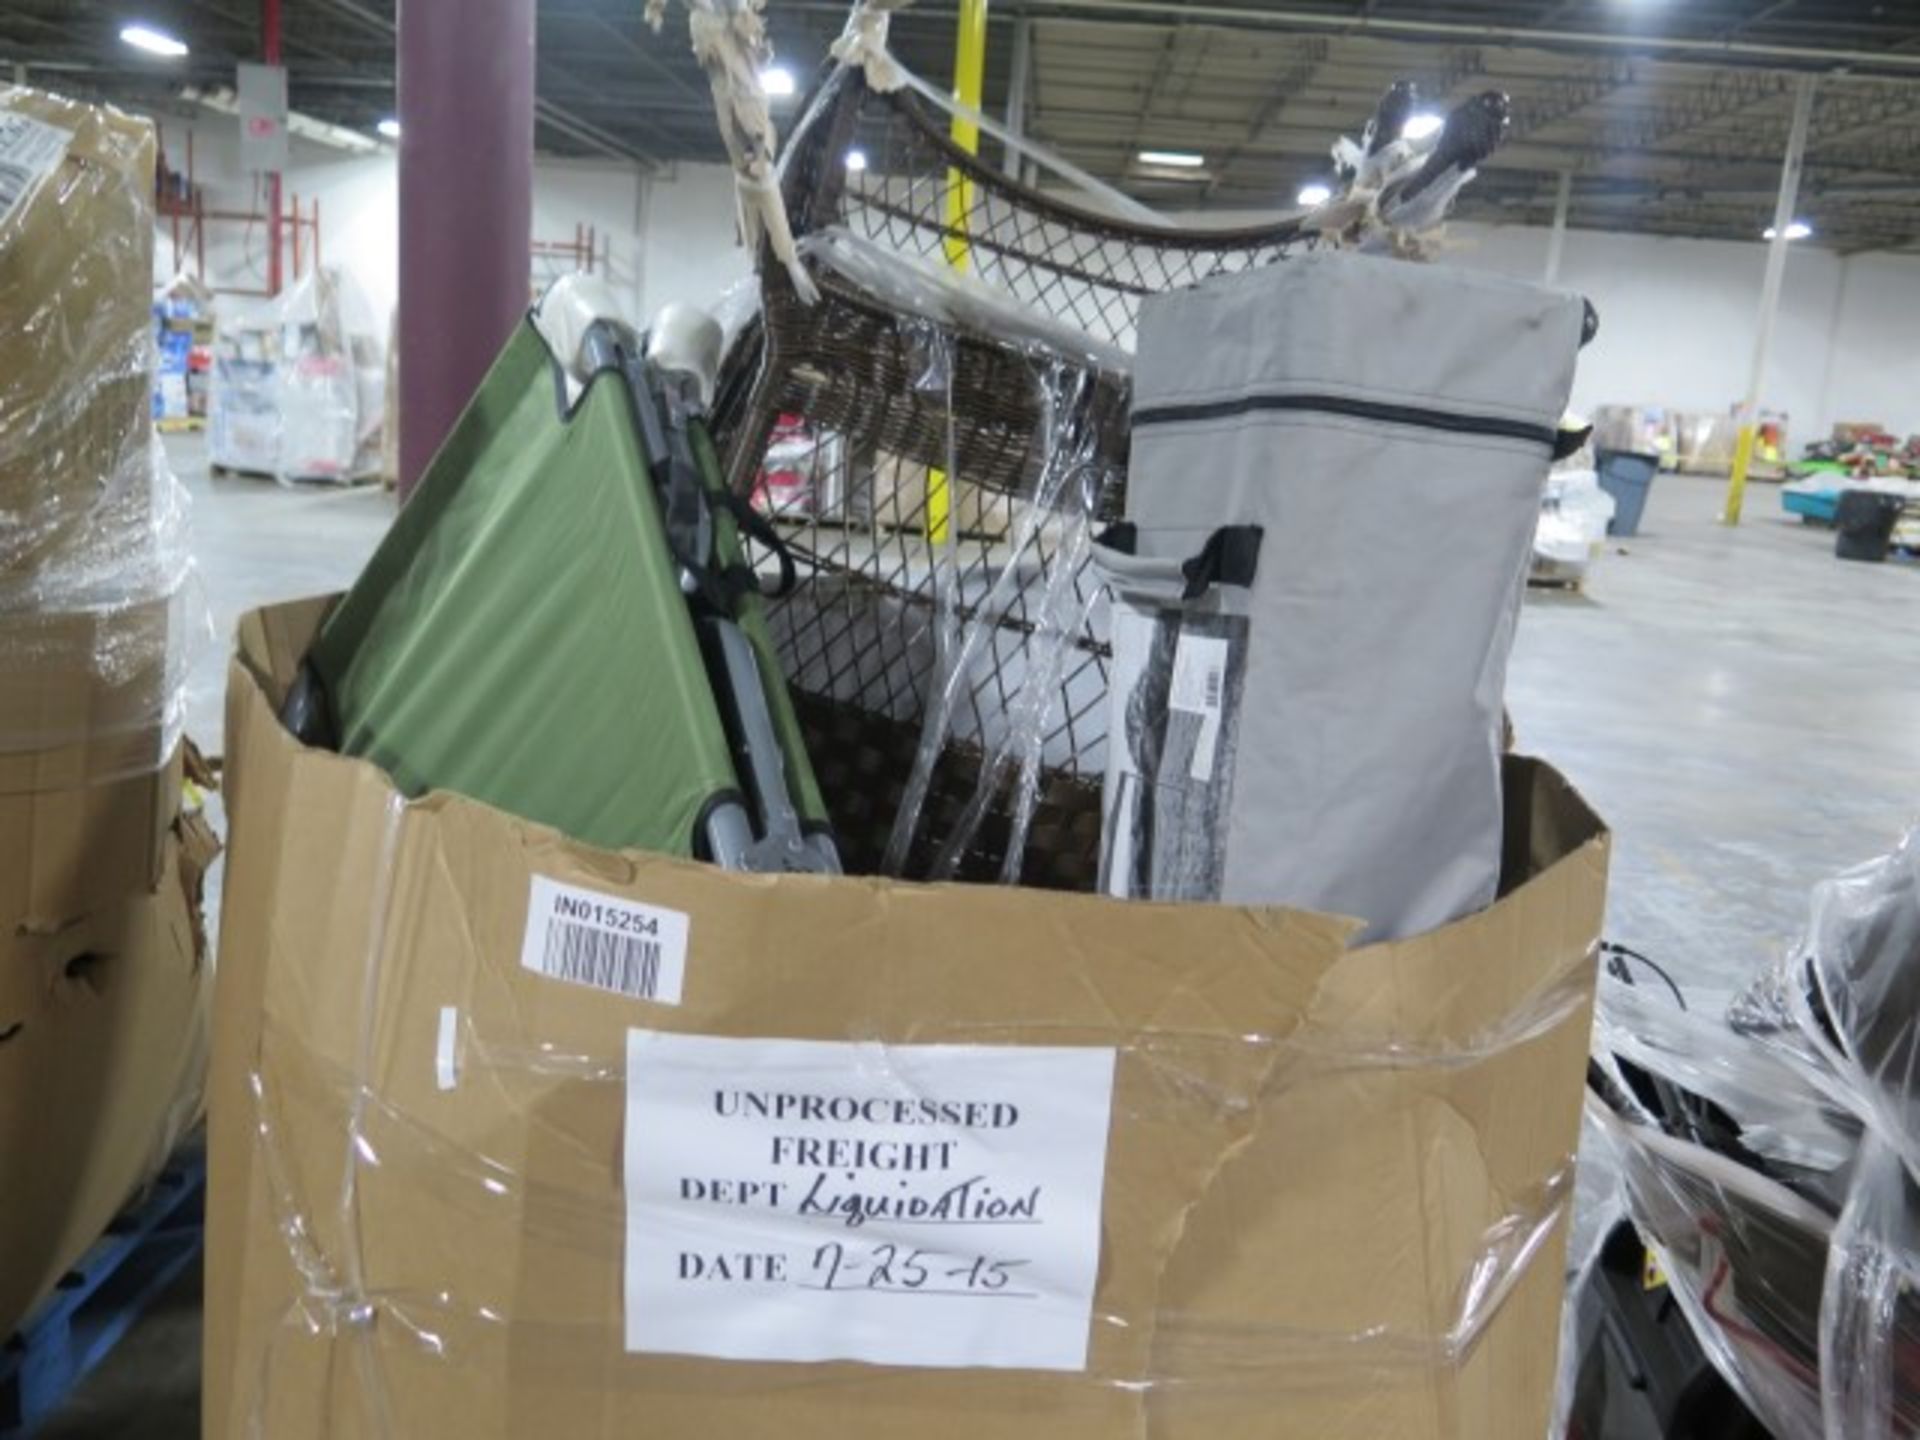 Lot of Outdoor, Chair, Canopy, Cot, Closet Organizer & Lawn Trimmer with $798 ESTIMATED retail - Image 5 of 5